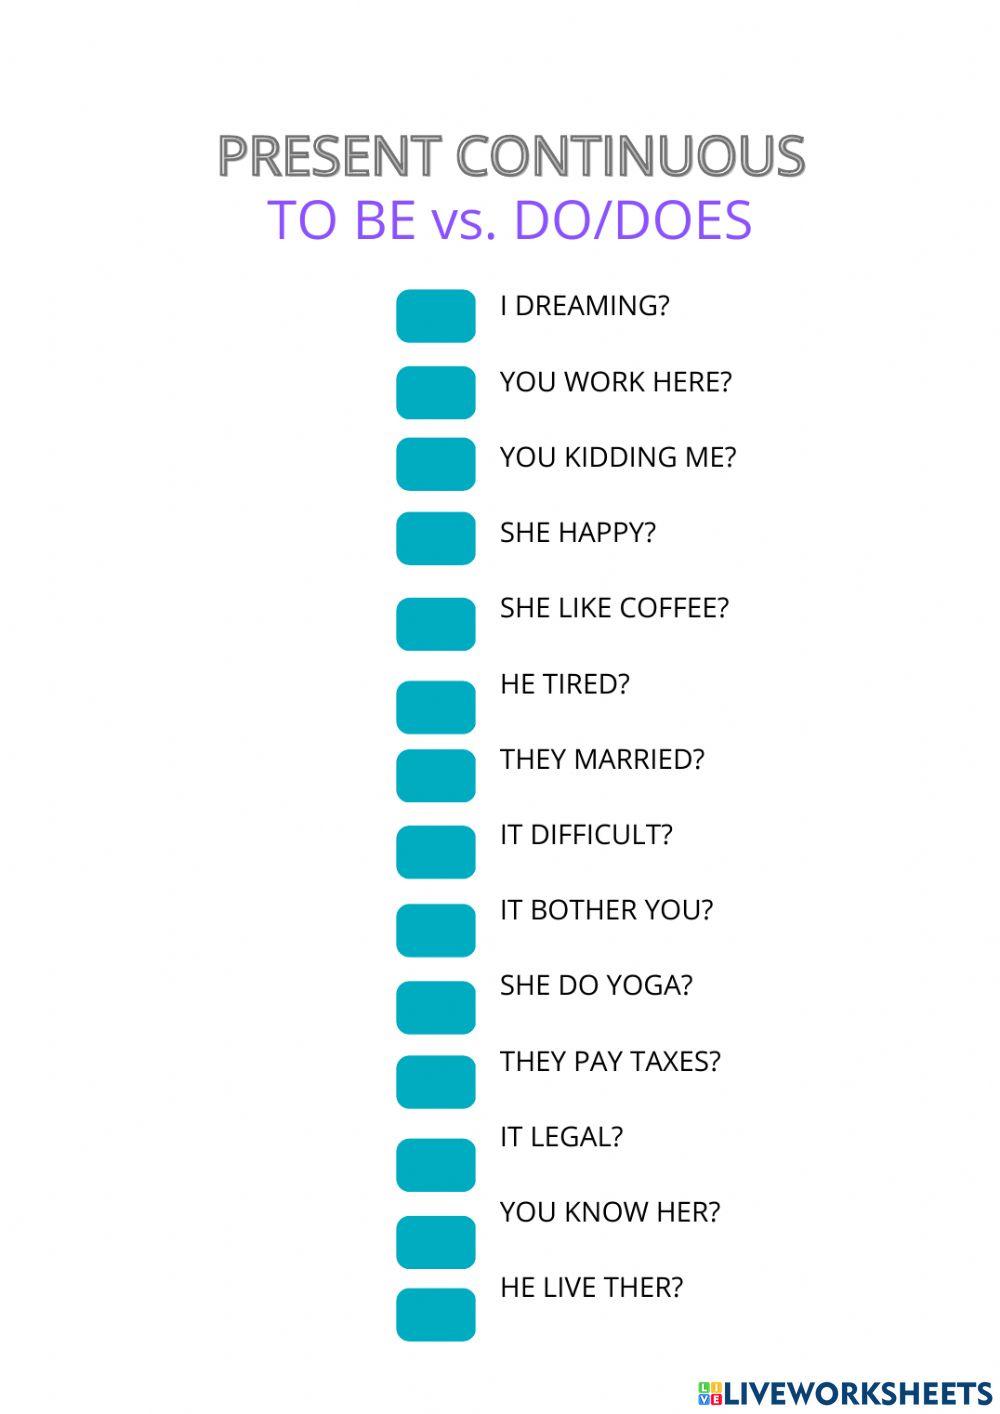 To be vs. do-does